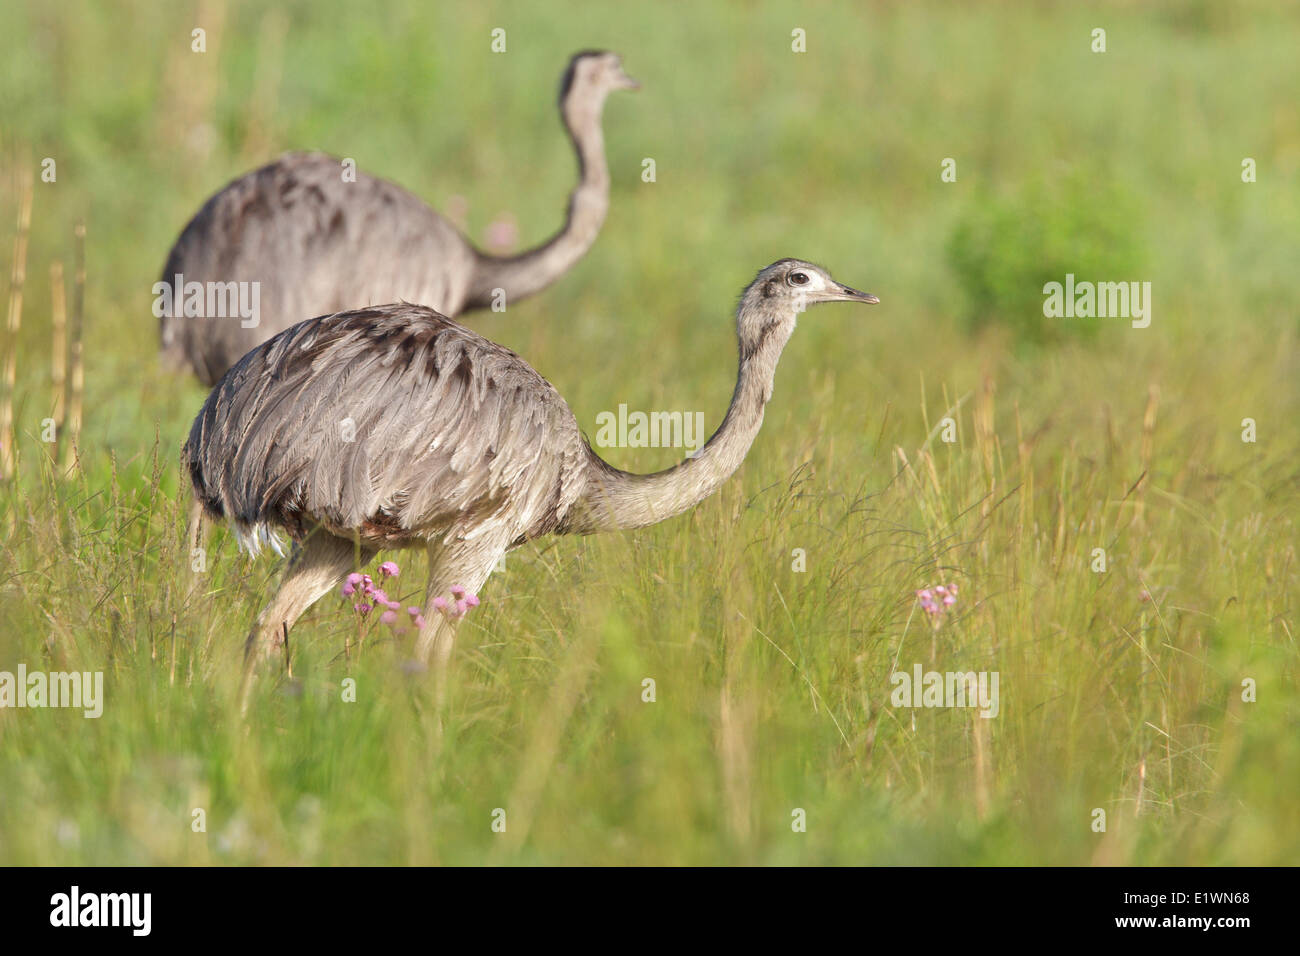 Greater Rhea (Rhea americana) perched on the ground in Bolivia, South America. Stock Photo